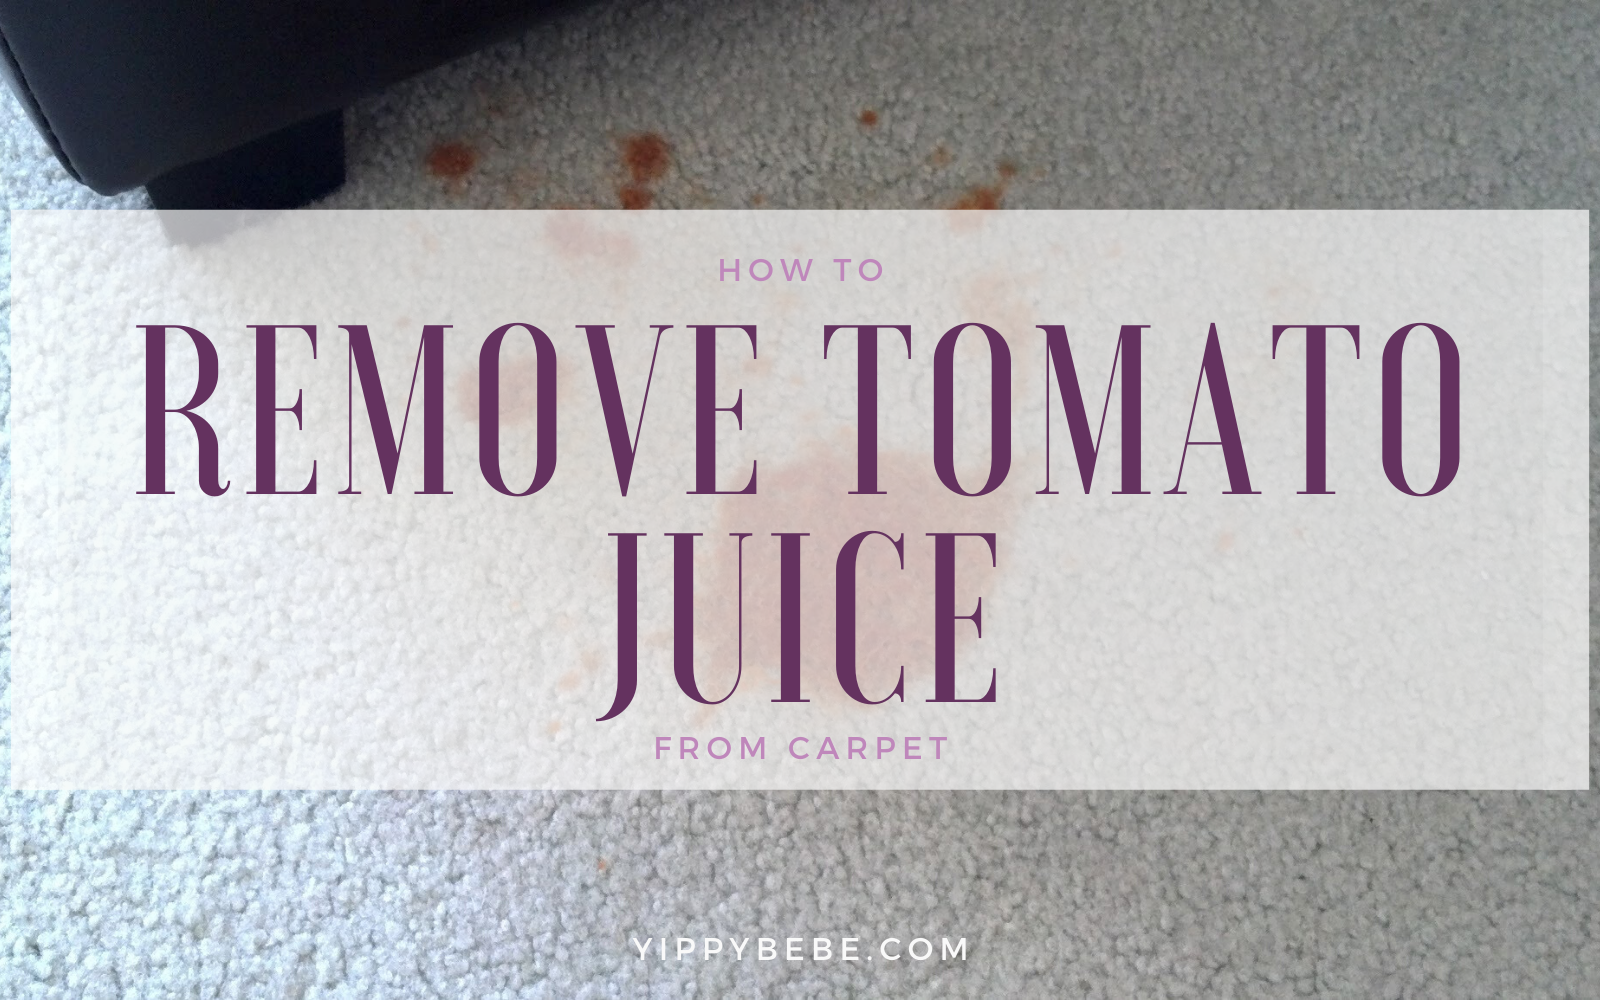 How to Remove Tomato Juice from Carpet